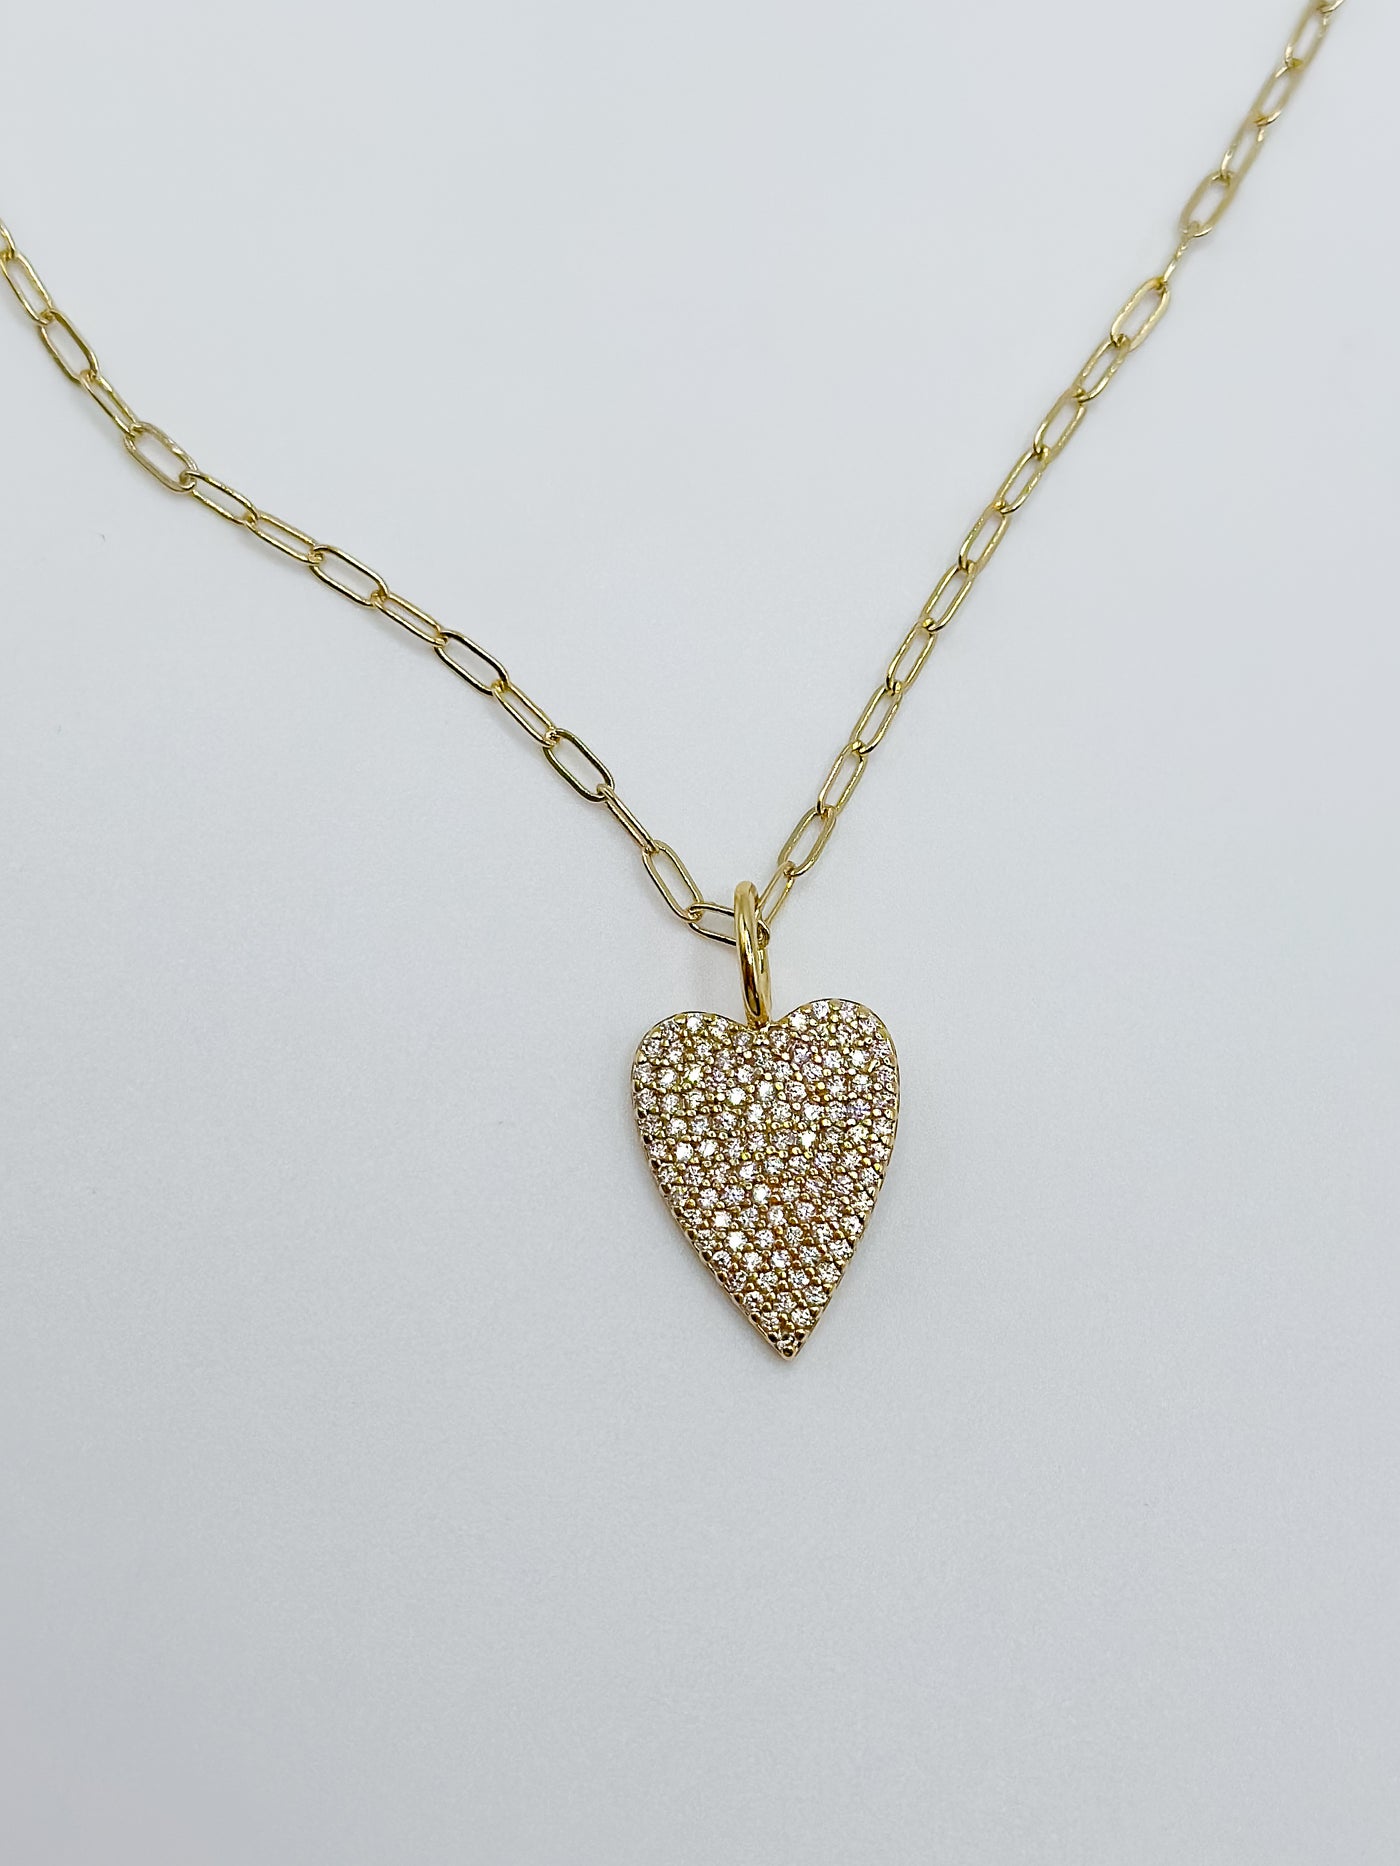 Gold/Clear Moody Heart Charm